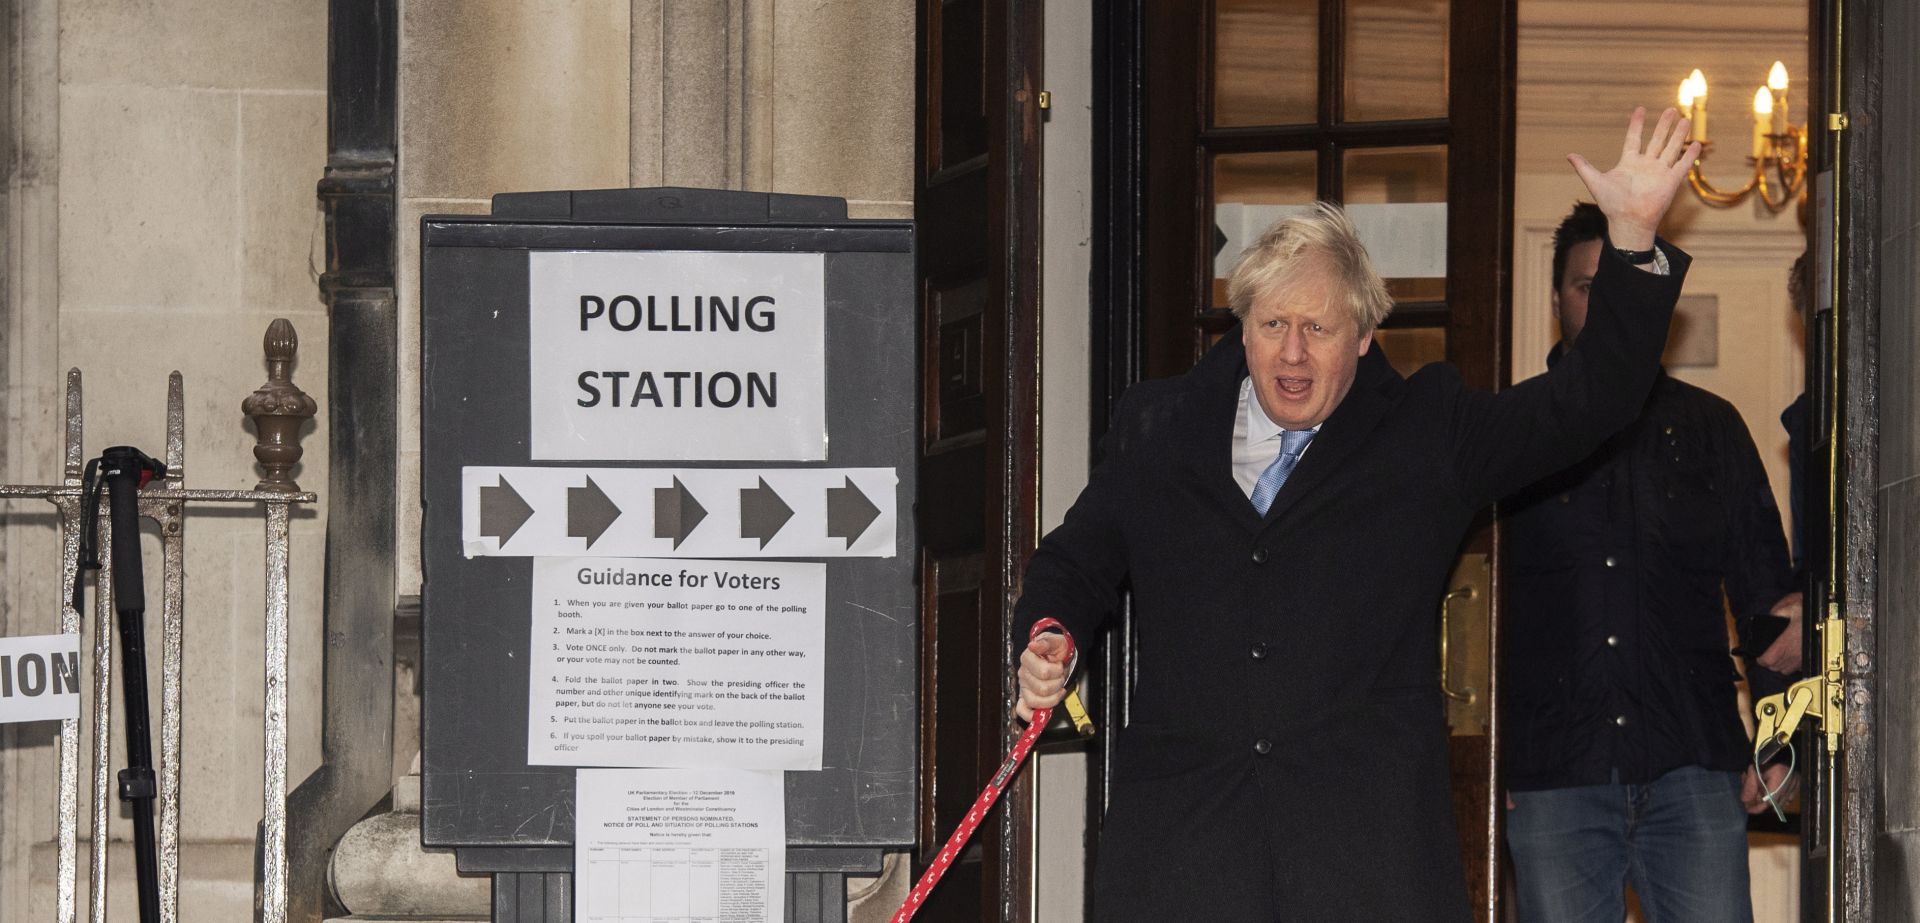 epa08064410 British Prime Minister Boris Johnson arrives with his dog Dilyn at the Central Methodist Hall in London, Britain, 12 December 2019. Britons go to the polls on 12 December 2019 in a general election to vote for a new parliament.  EPA/FACUNDO ARRIZABALAGA